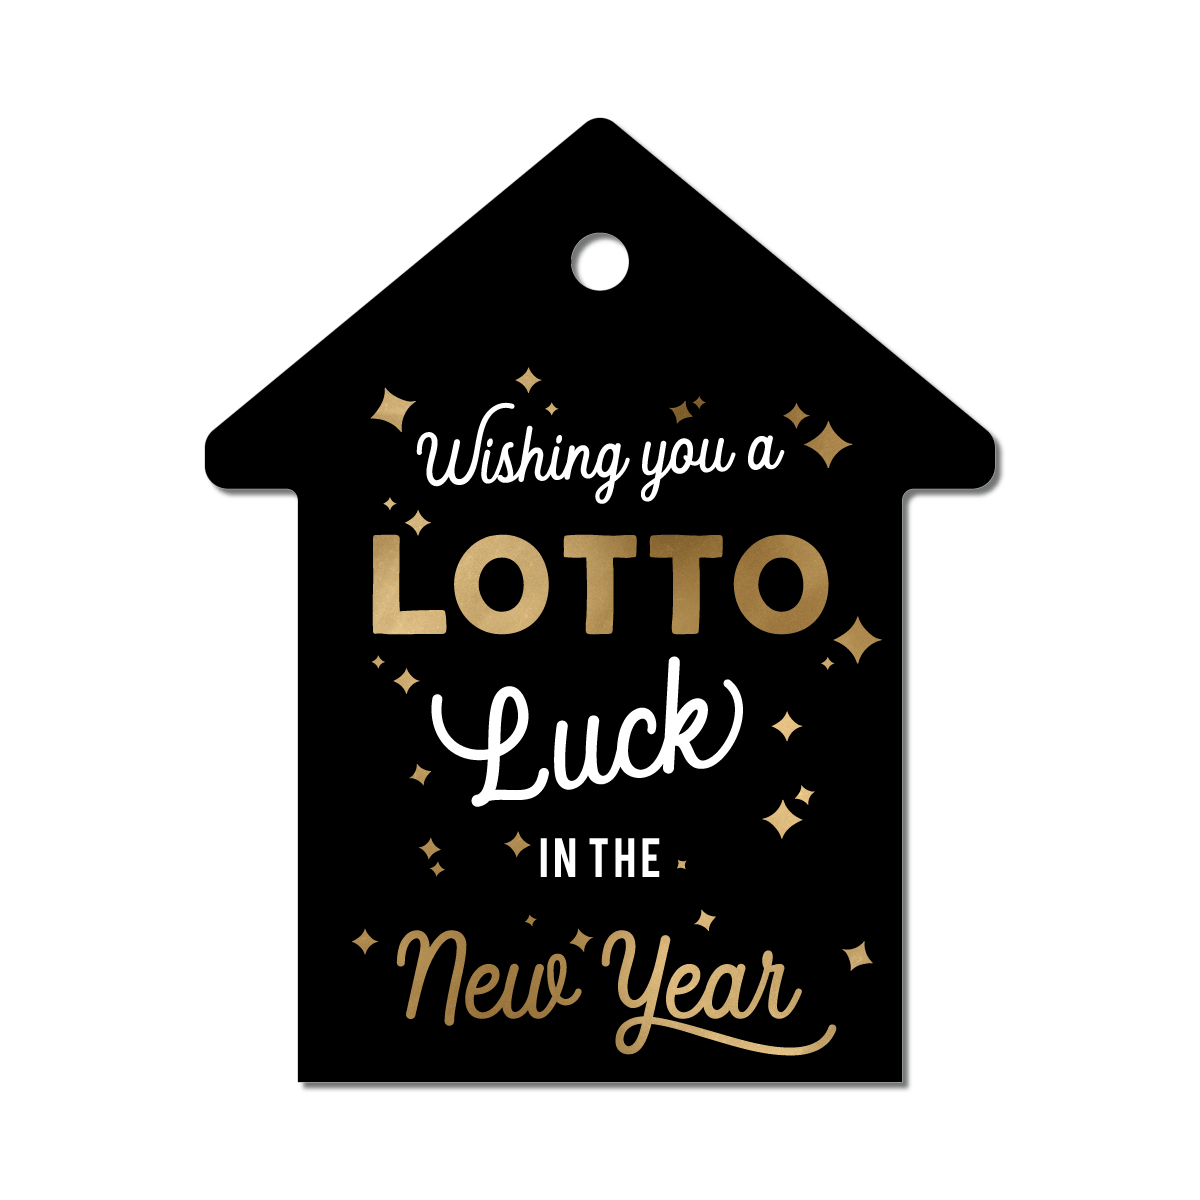 Lottery Ticket Holder - Holiday - Wishing You a Lotto Luck in the New Year - All Things Real Estate